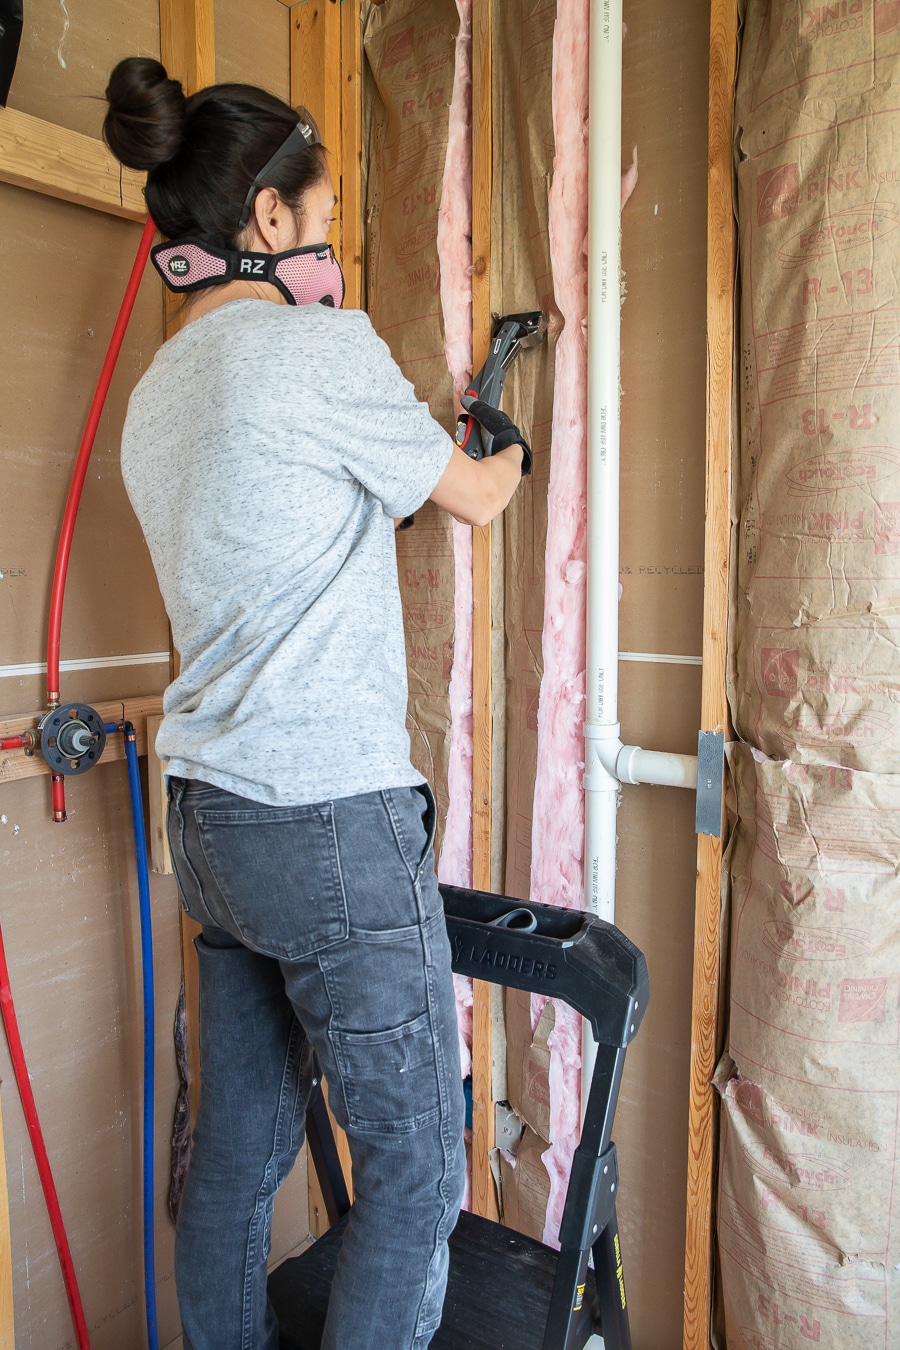 R13 Insulation, All You Need to Know